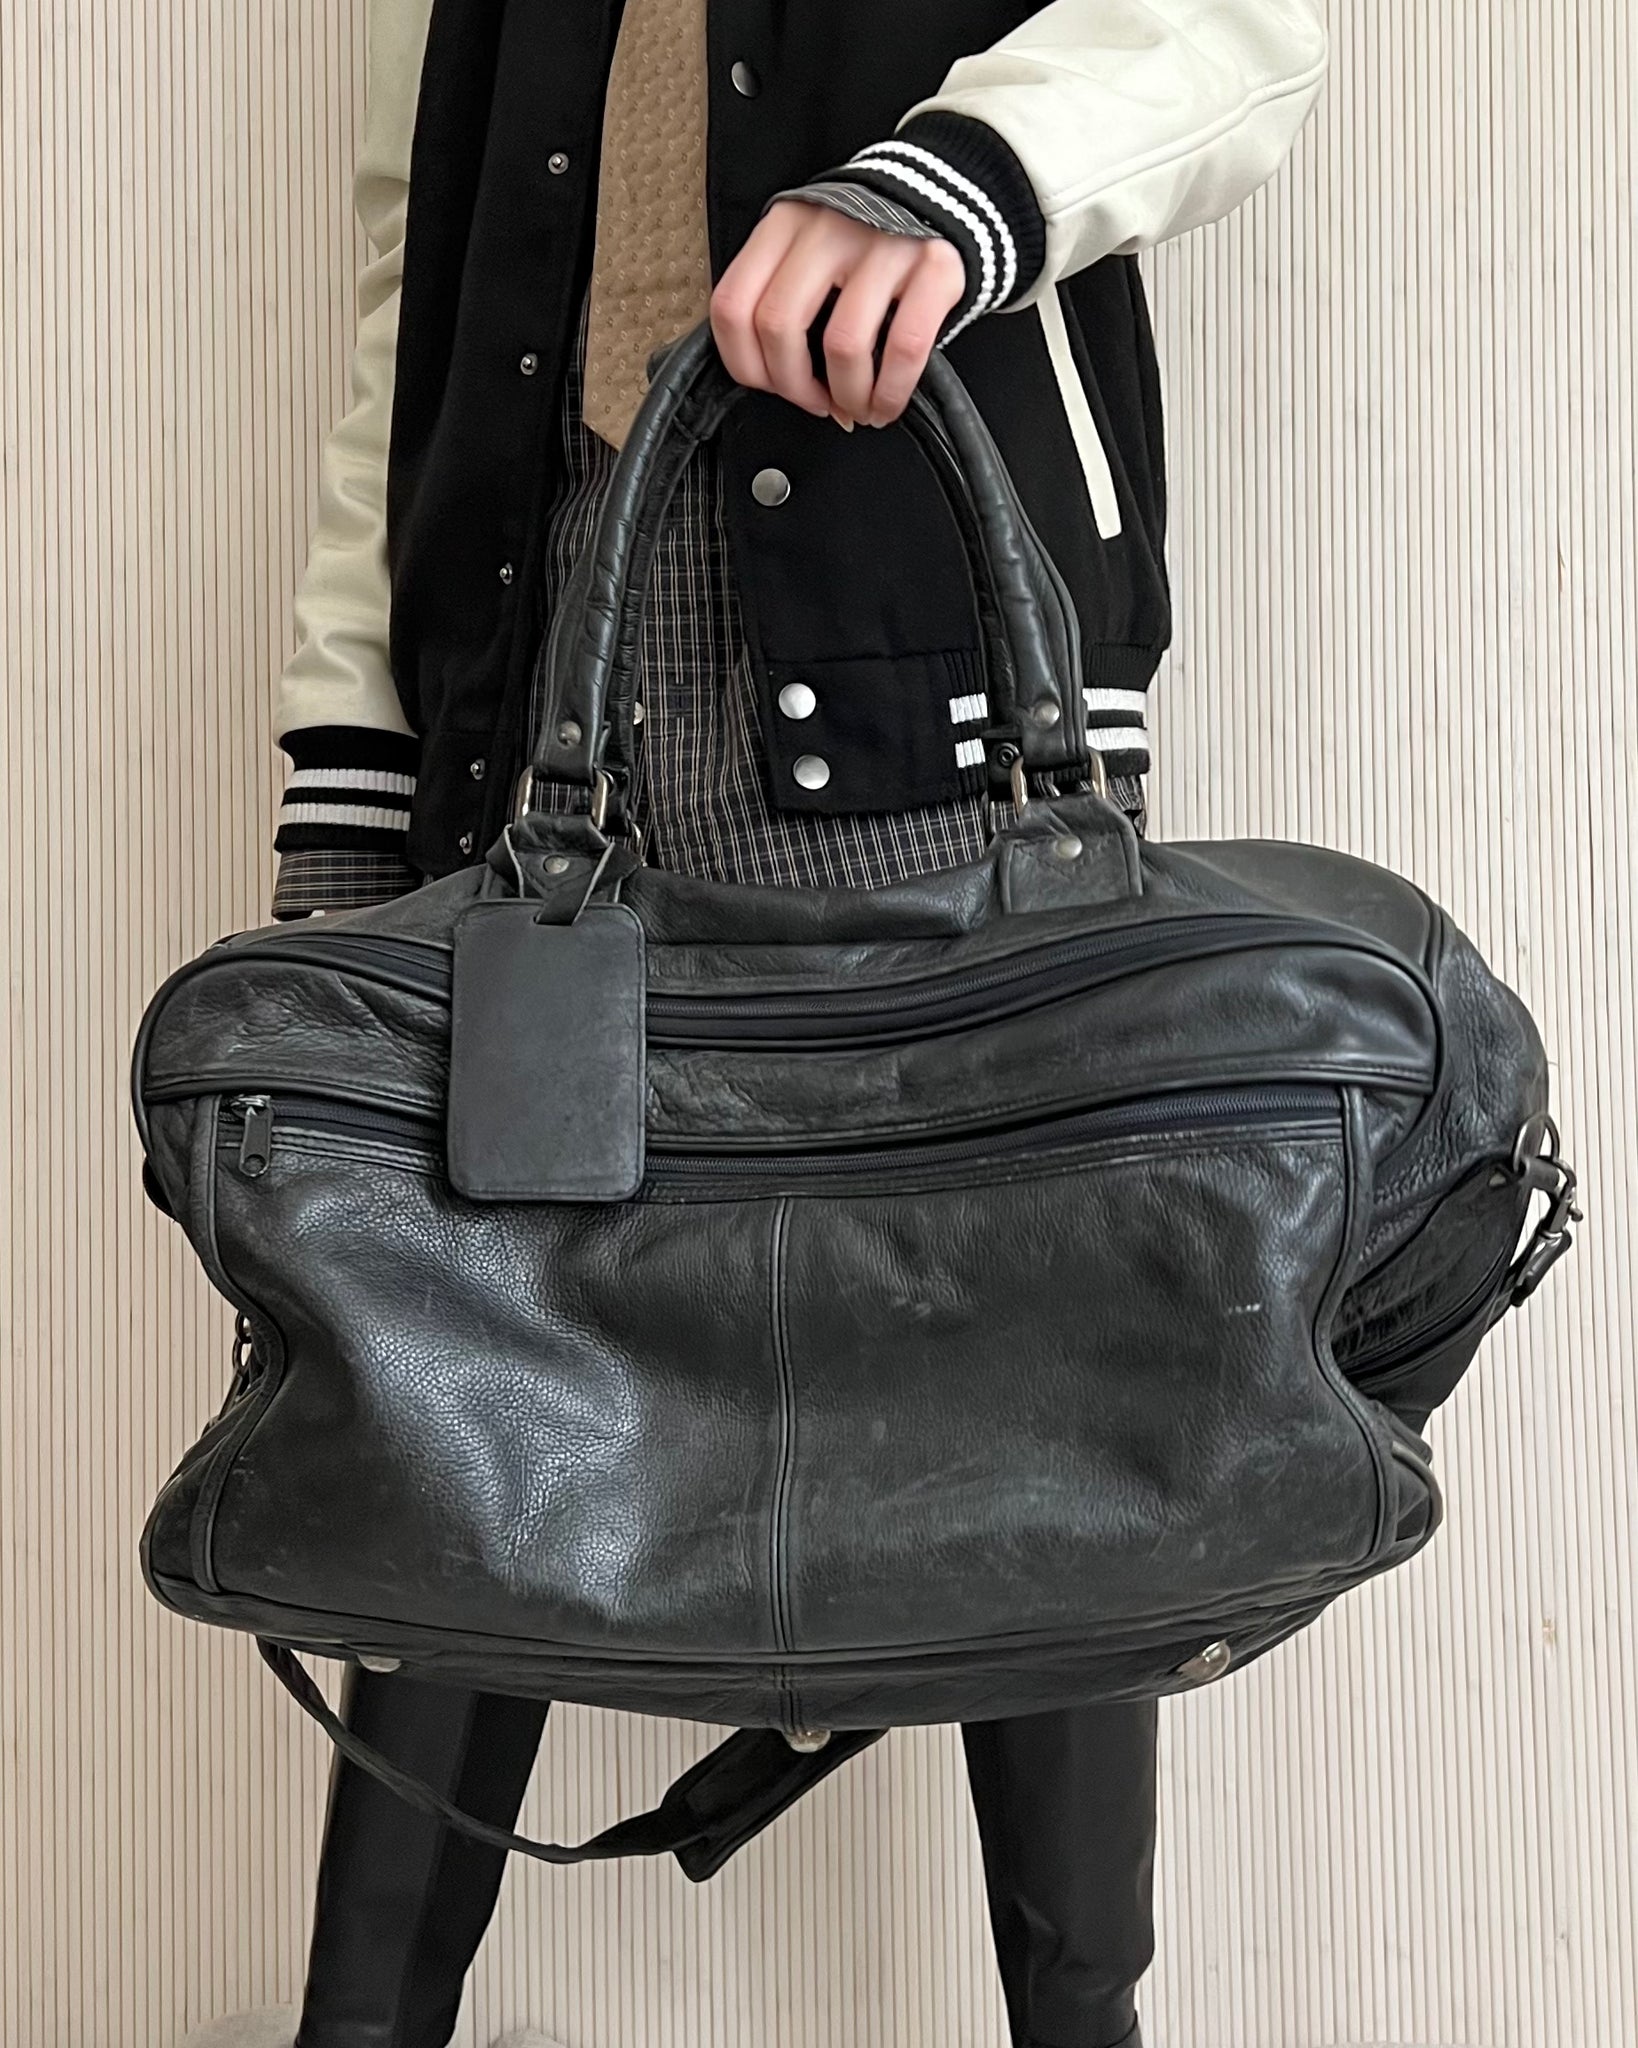 Distressed Leather Duffle Bag